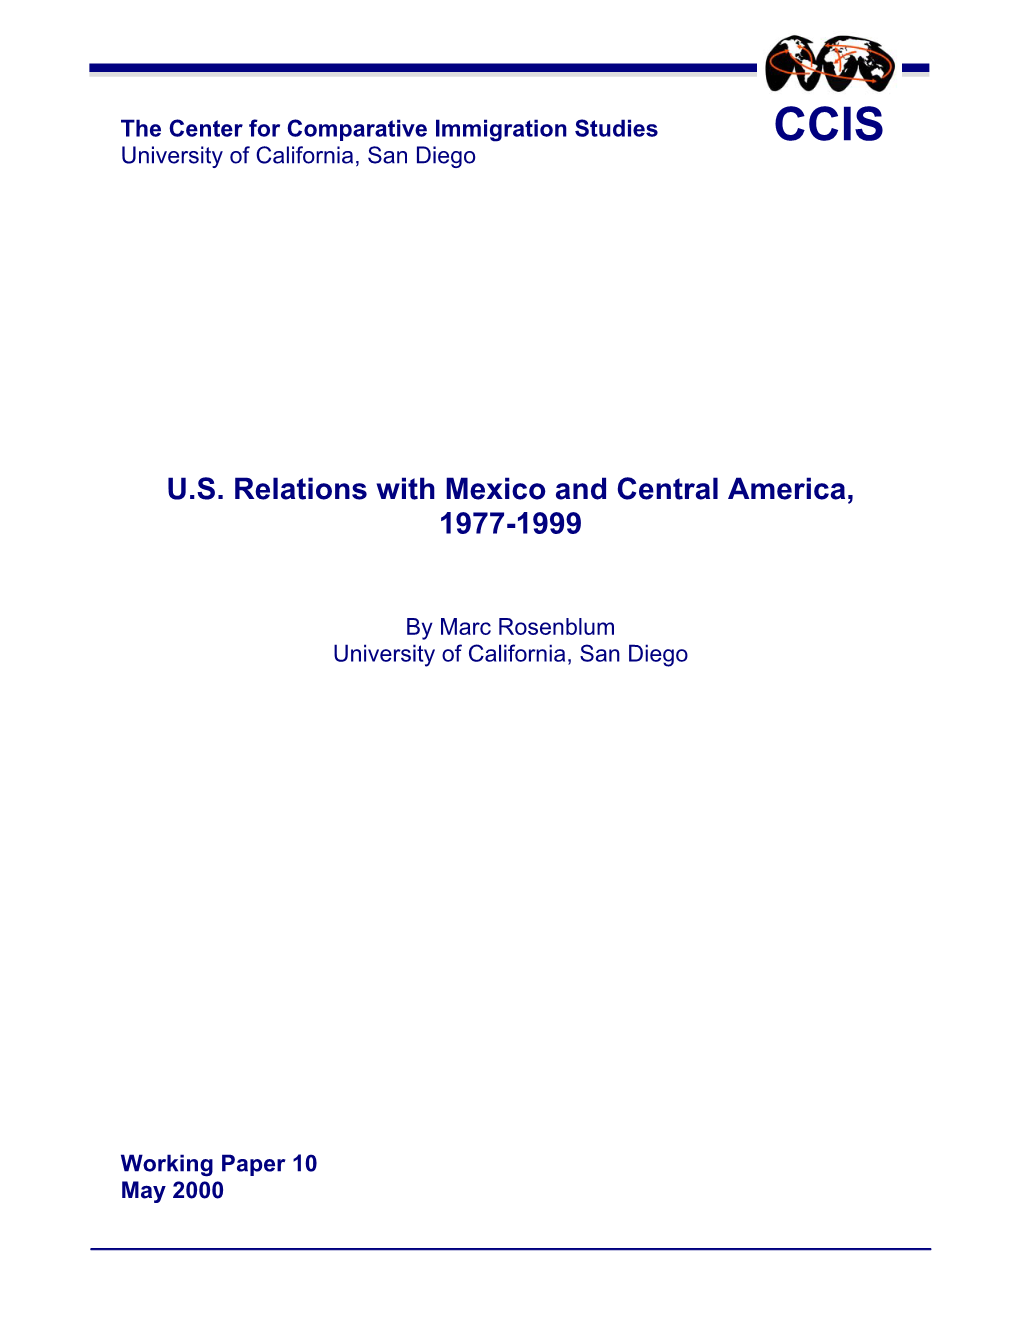 U.S. Relations with Mexico and Central America, 1977-1999